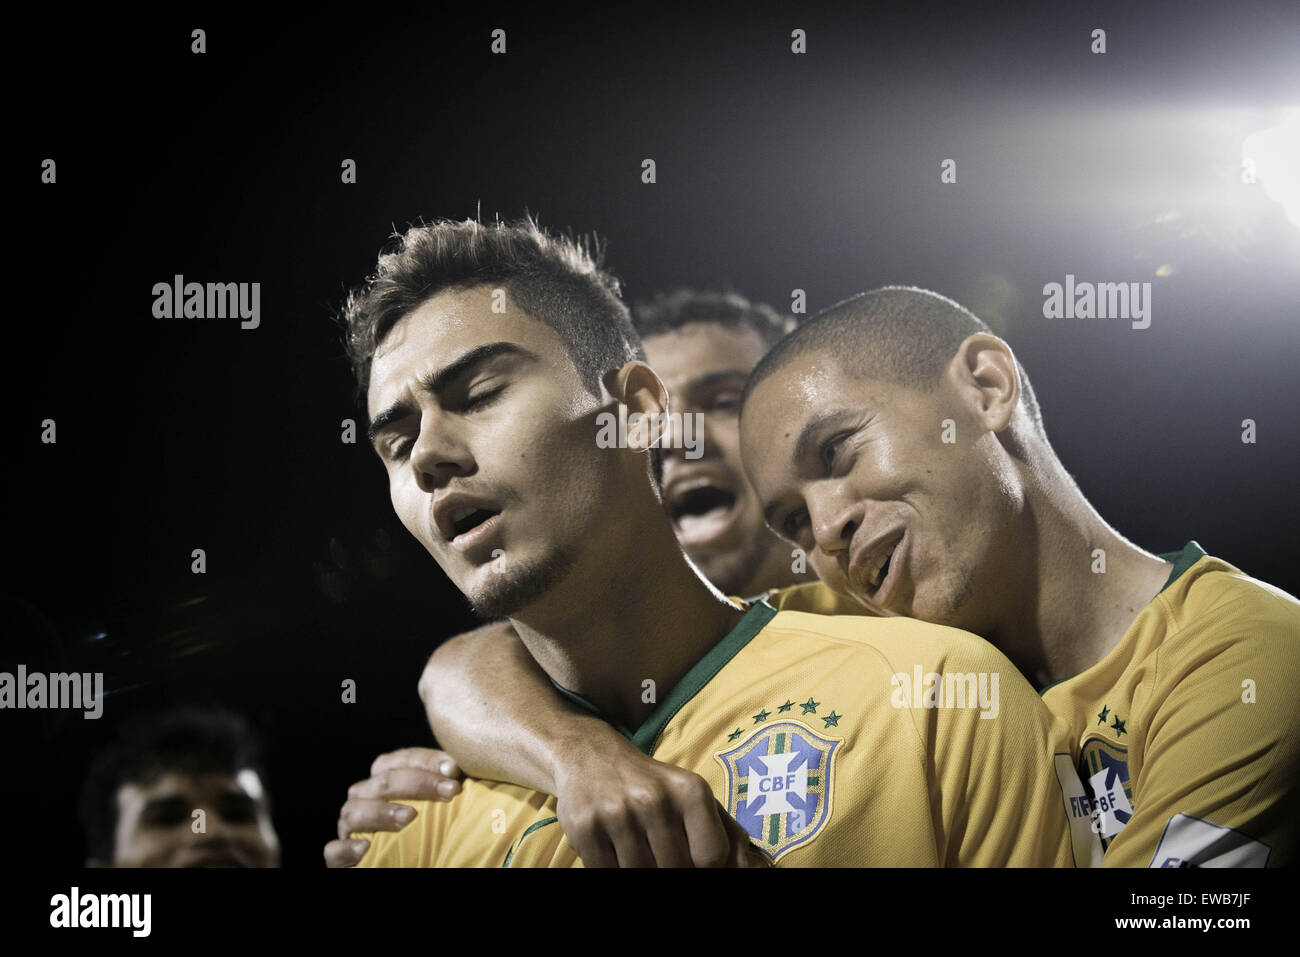 Auckland, New Zealand, Feature, Highlight. 20th June, 2015. Auckland, New Zealand - June 20, 2015 - Andreas Pereira and Marcos Guilherme of Brazil (L-R) celebrating a goal during the FIFA U20 World Cup final match between Brazil and Serbia at North Harbour Stadium on June 20, 2015 in Auckland, New Zealand, Feature, Highlight. Credit:  dpa/Alamy Live News Stock Photo